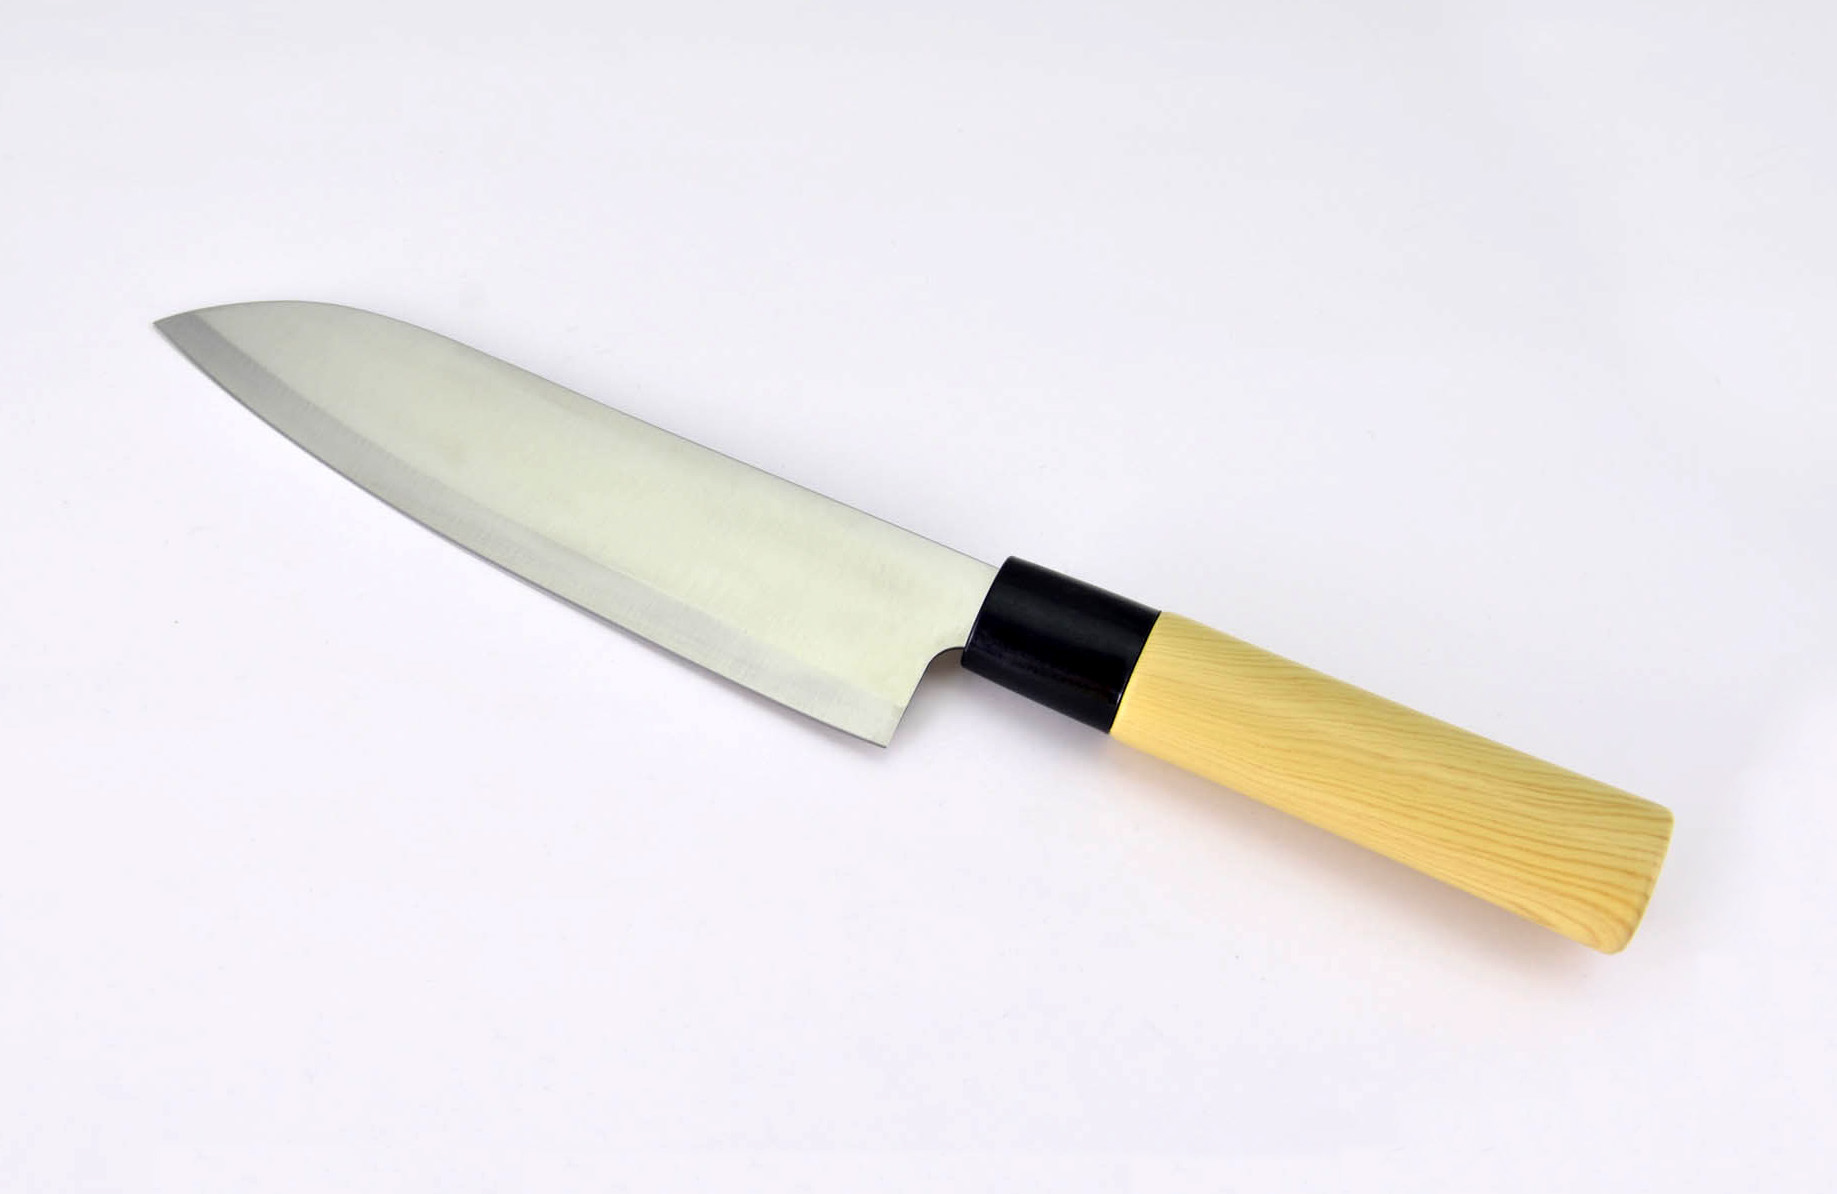 High Quality Stainless Steel Kitchen Fruit Knife